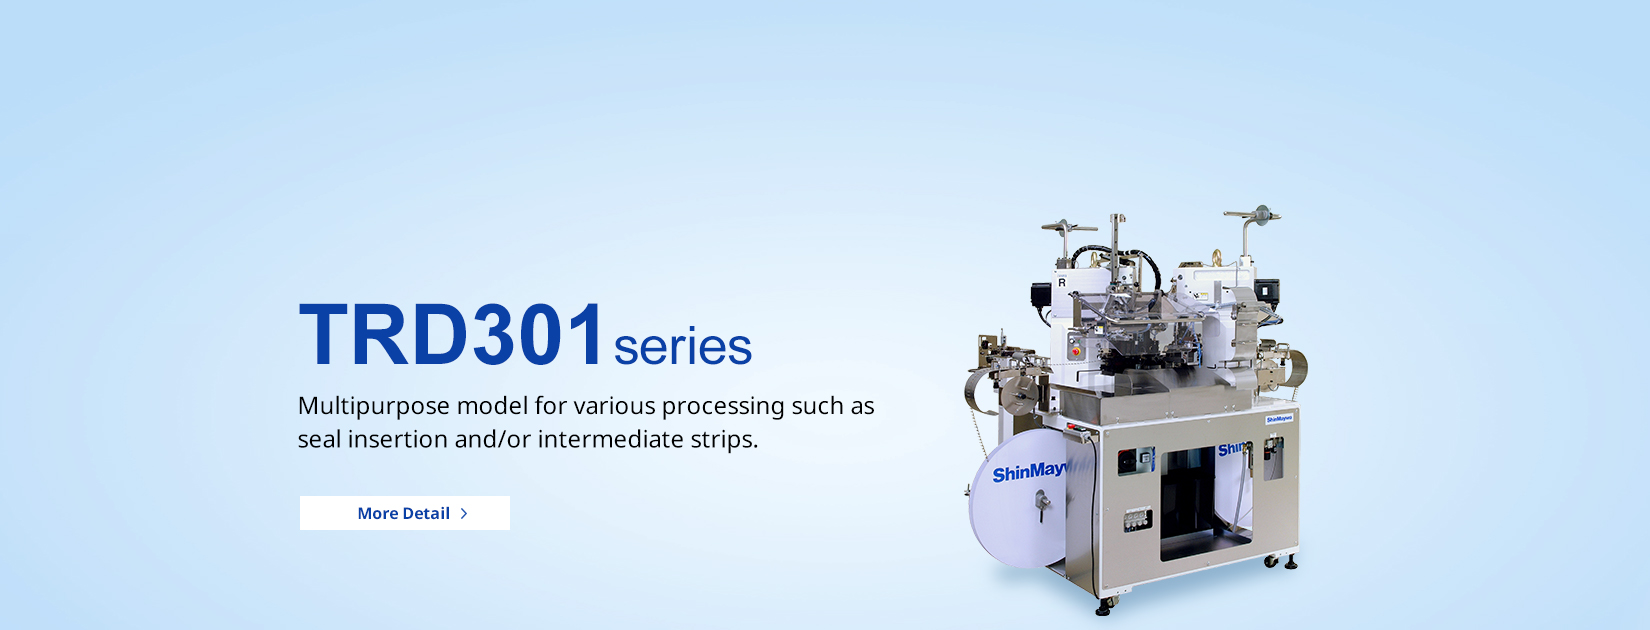 TRD301 series Multipurpose model for various processing such as seal insertion and/or intermediate strips.